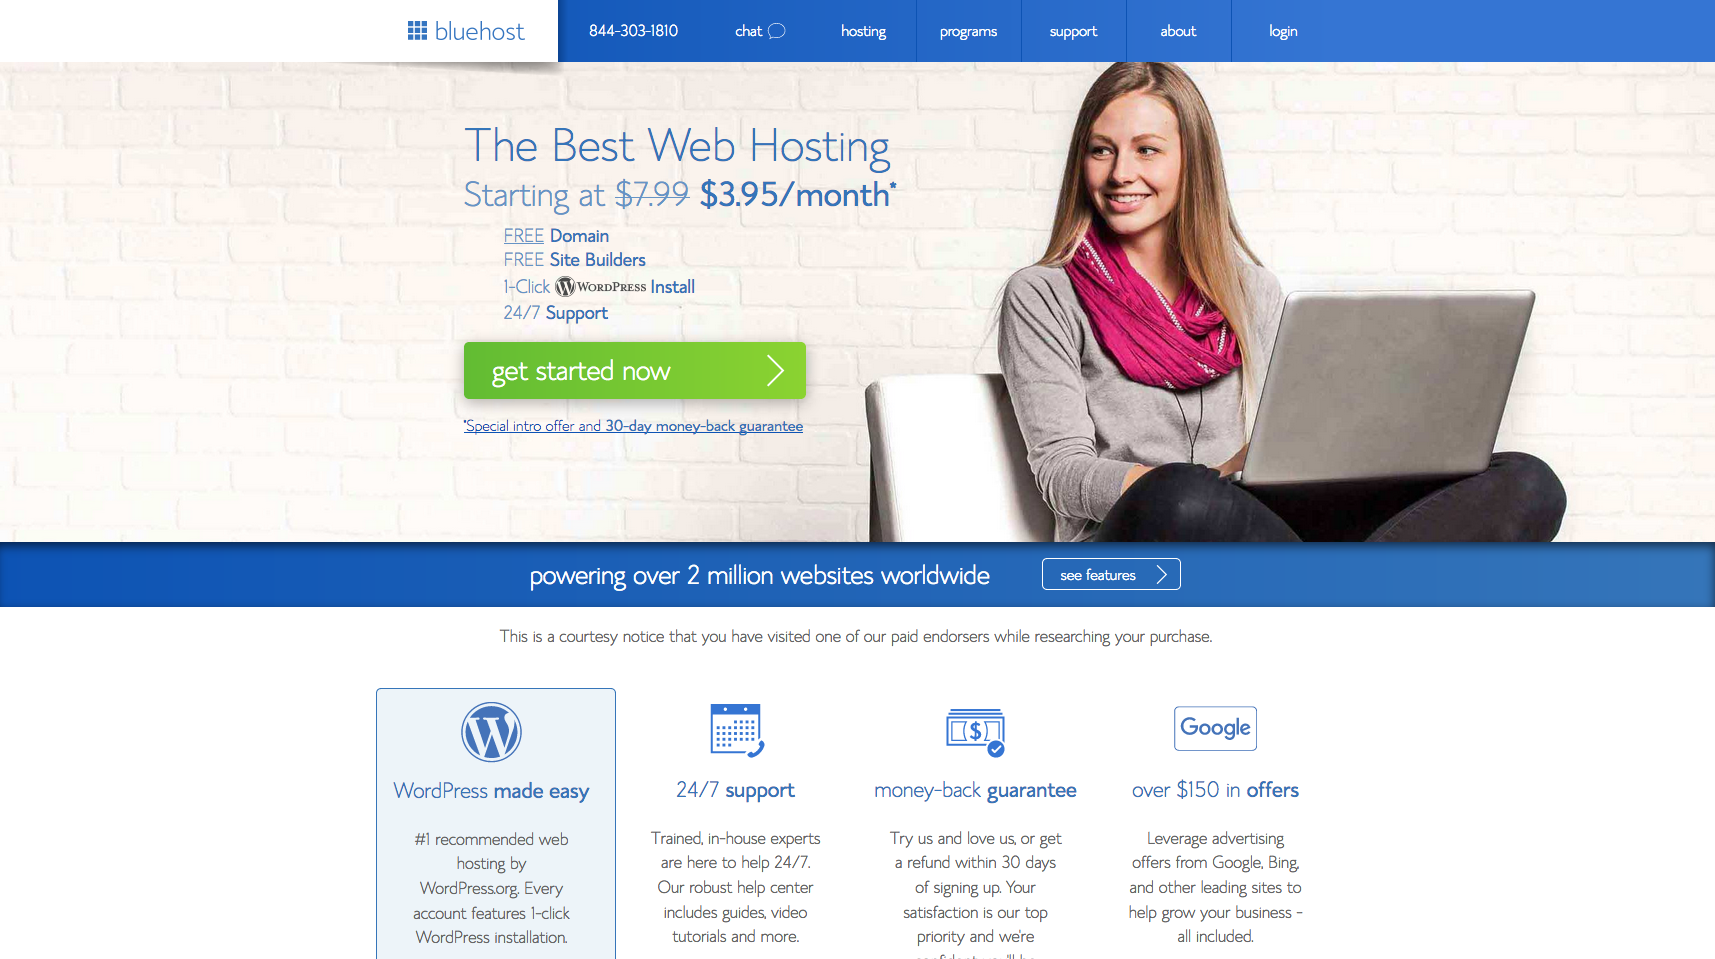 Use Bluehost to help you start your blog